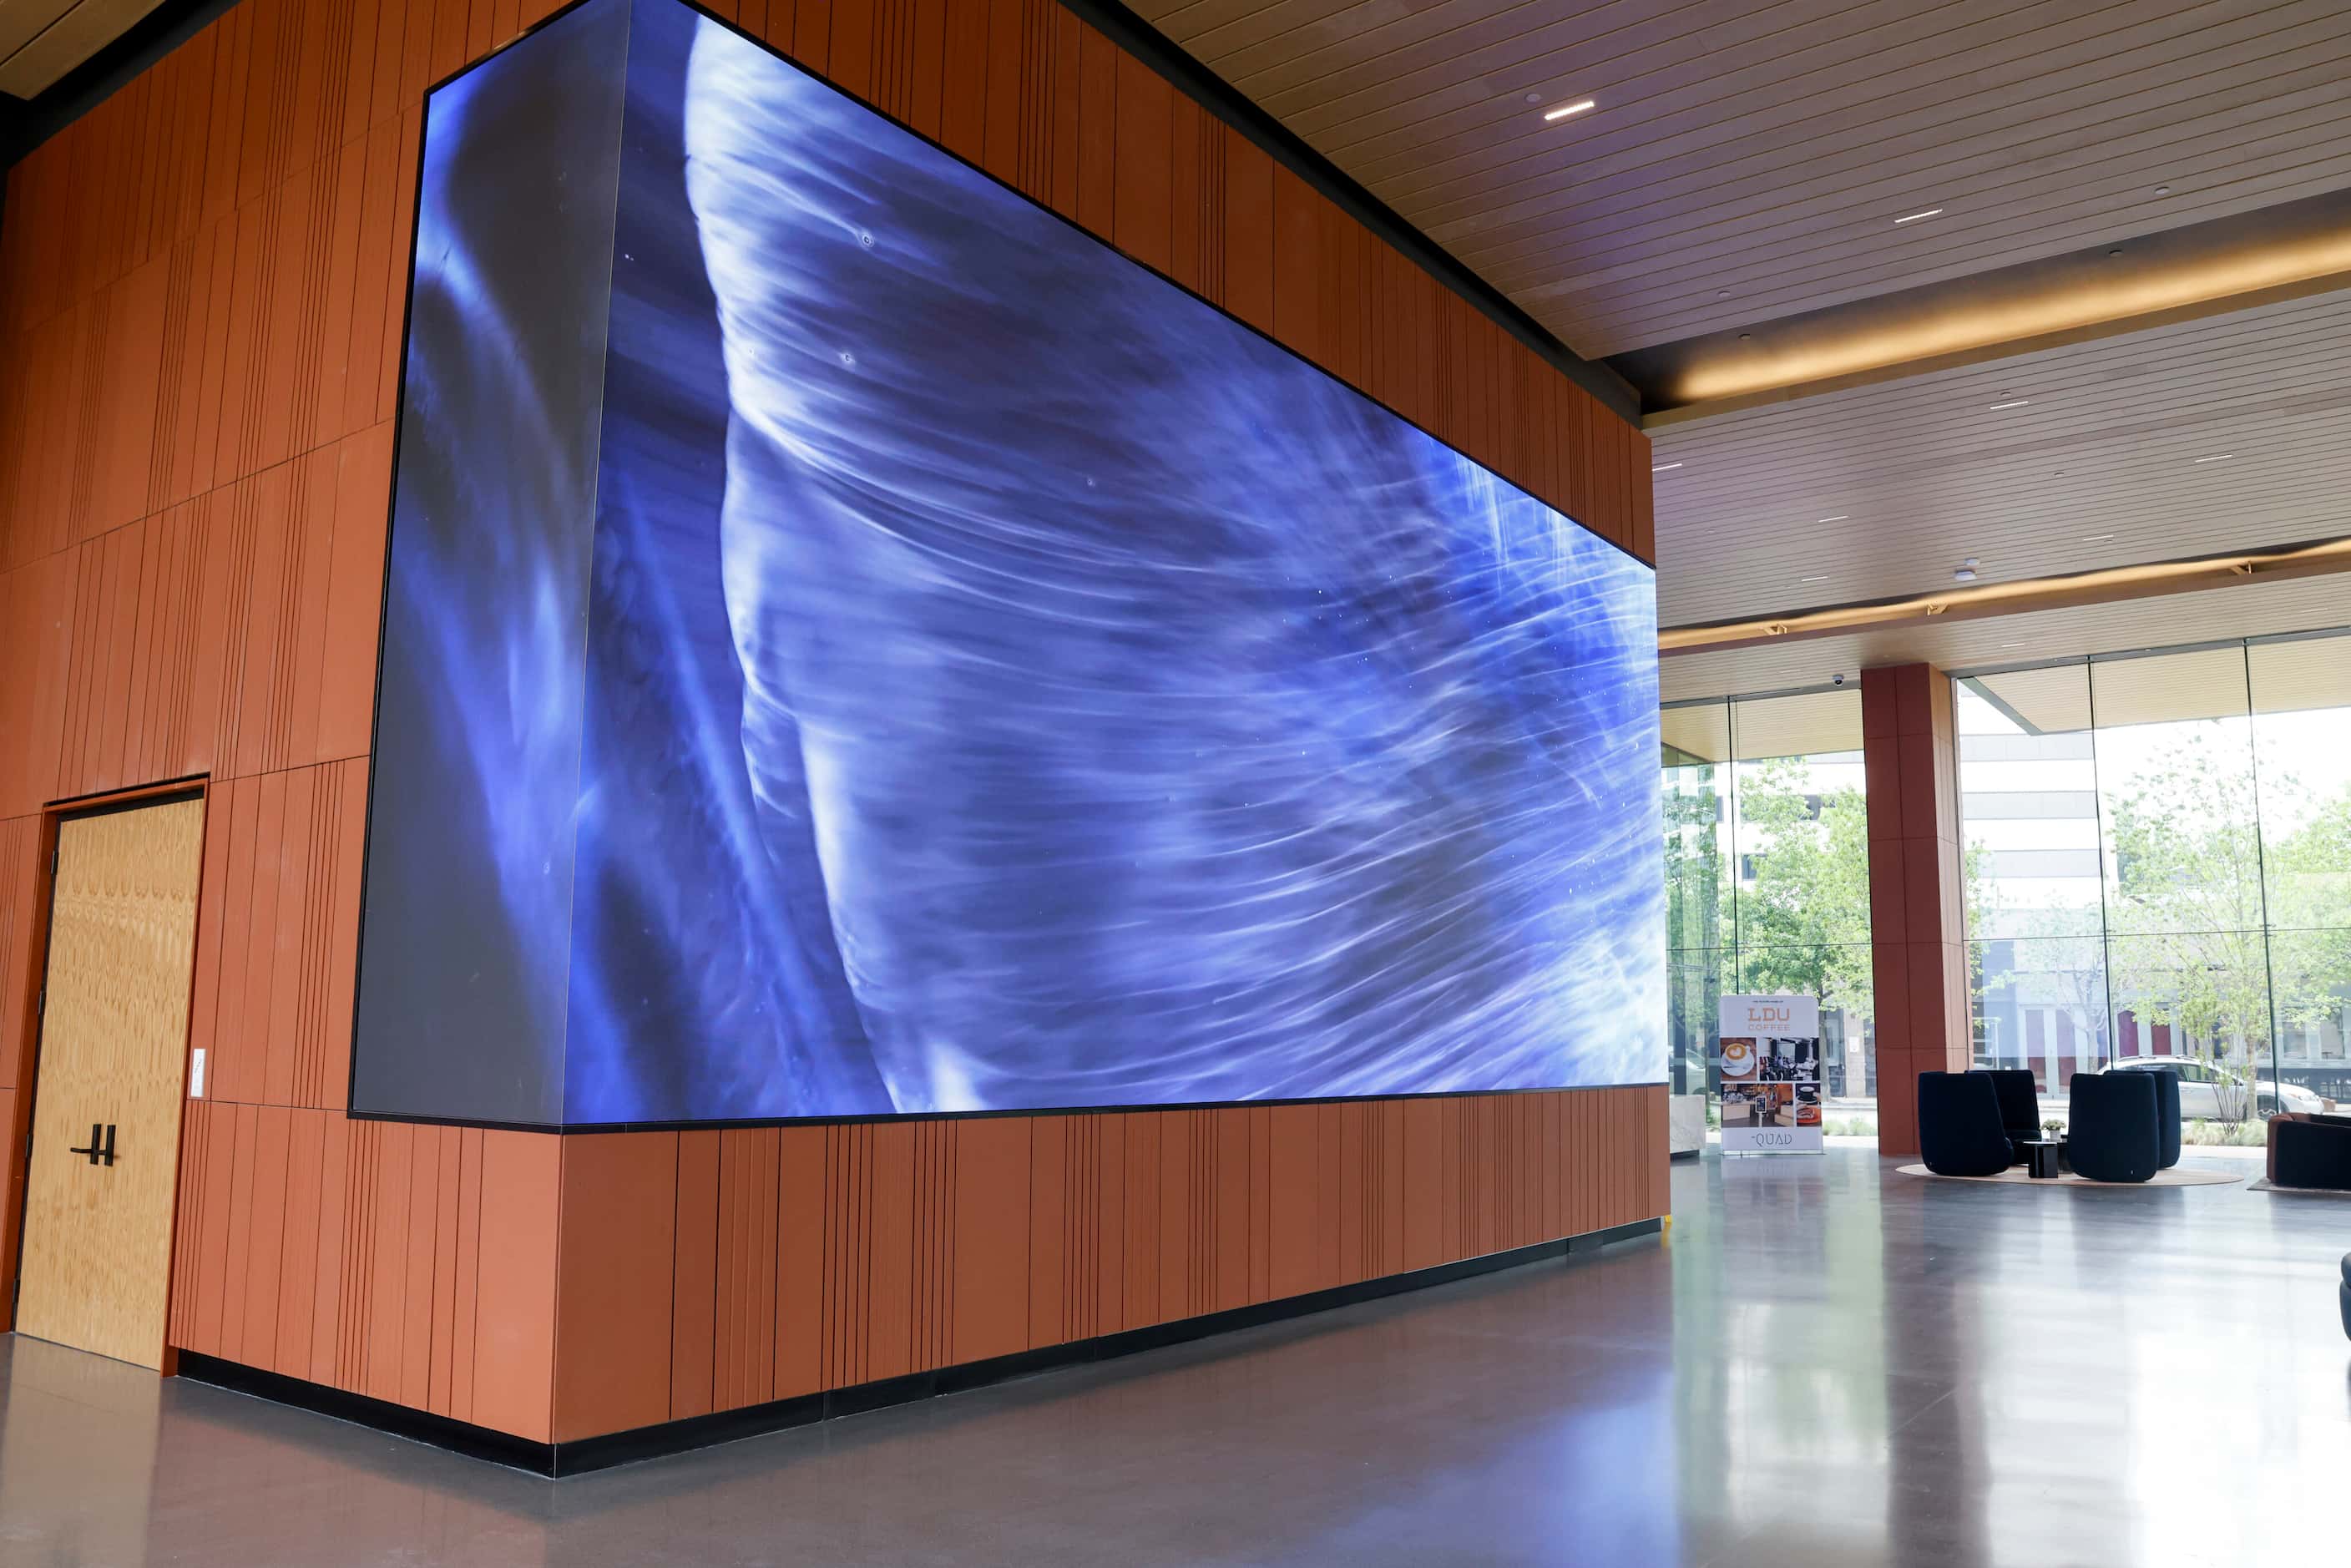 The lobby of the building holds Texas' largest indoor high-resolution digital art installation.